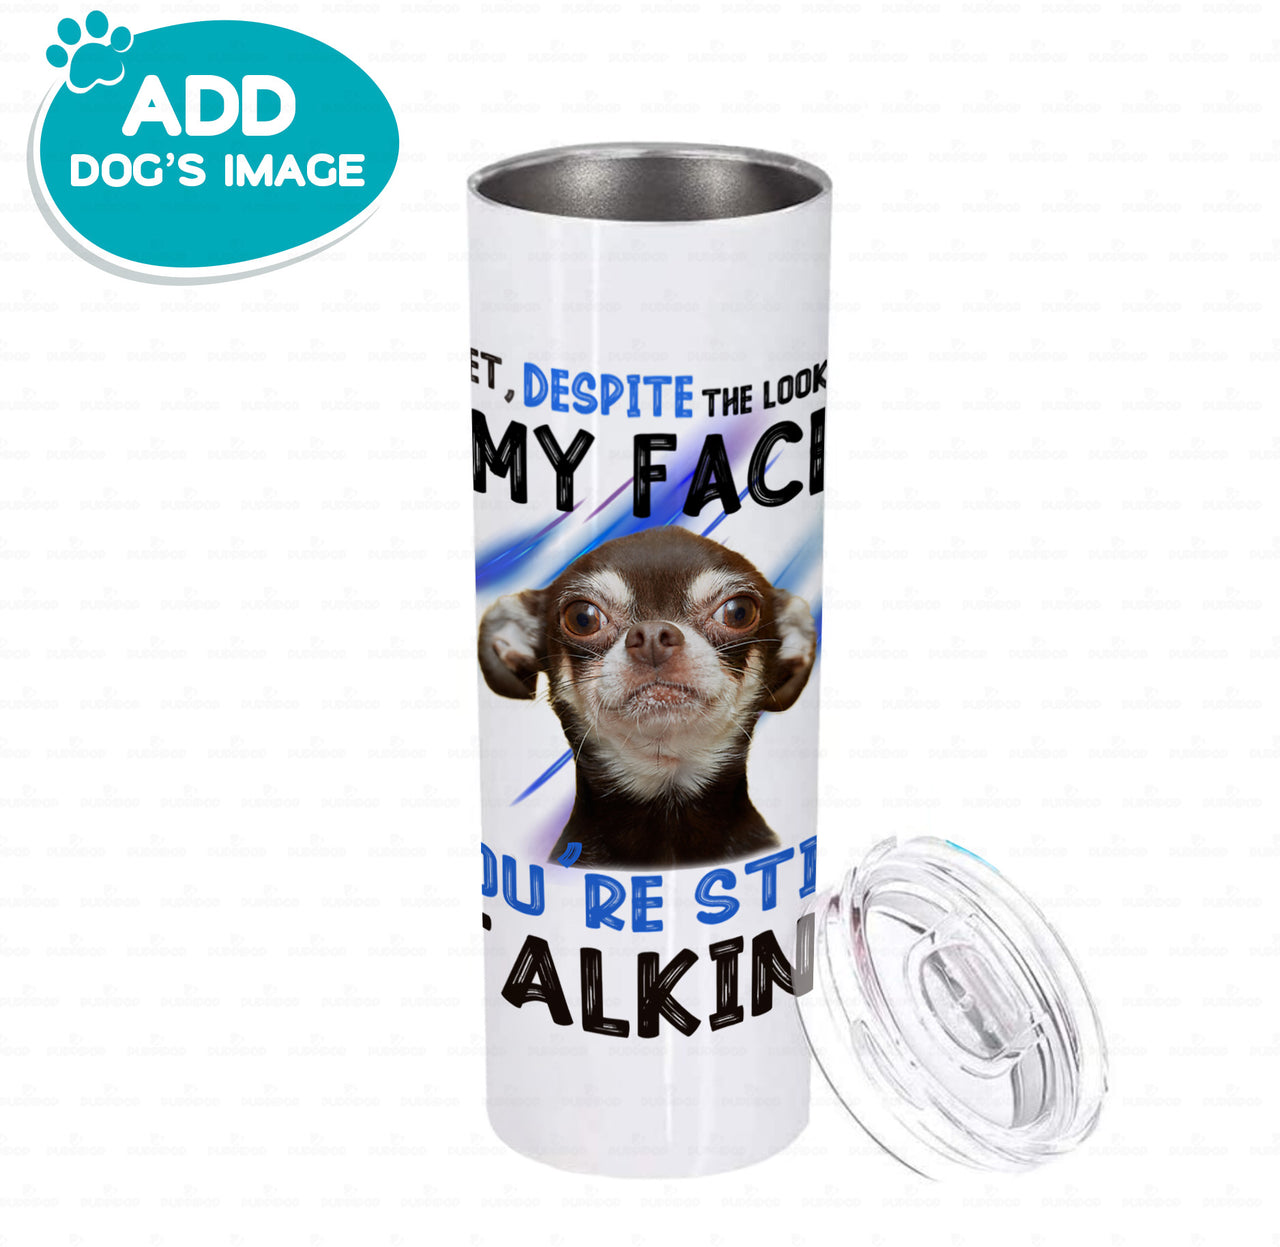 Personalized Dog Gift Idea - Chihuahua You Are Still Talking For Dog Lover - Tumbler